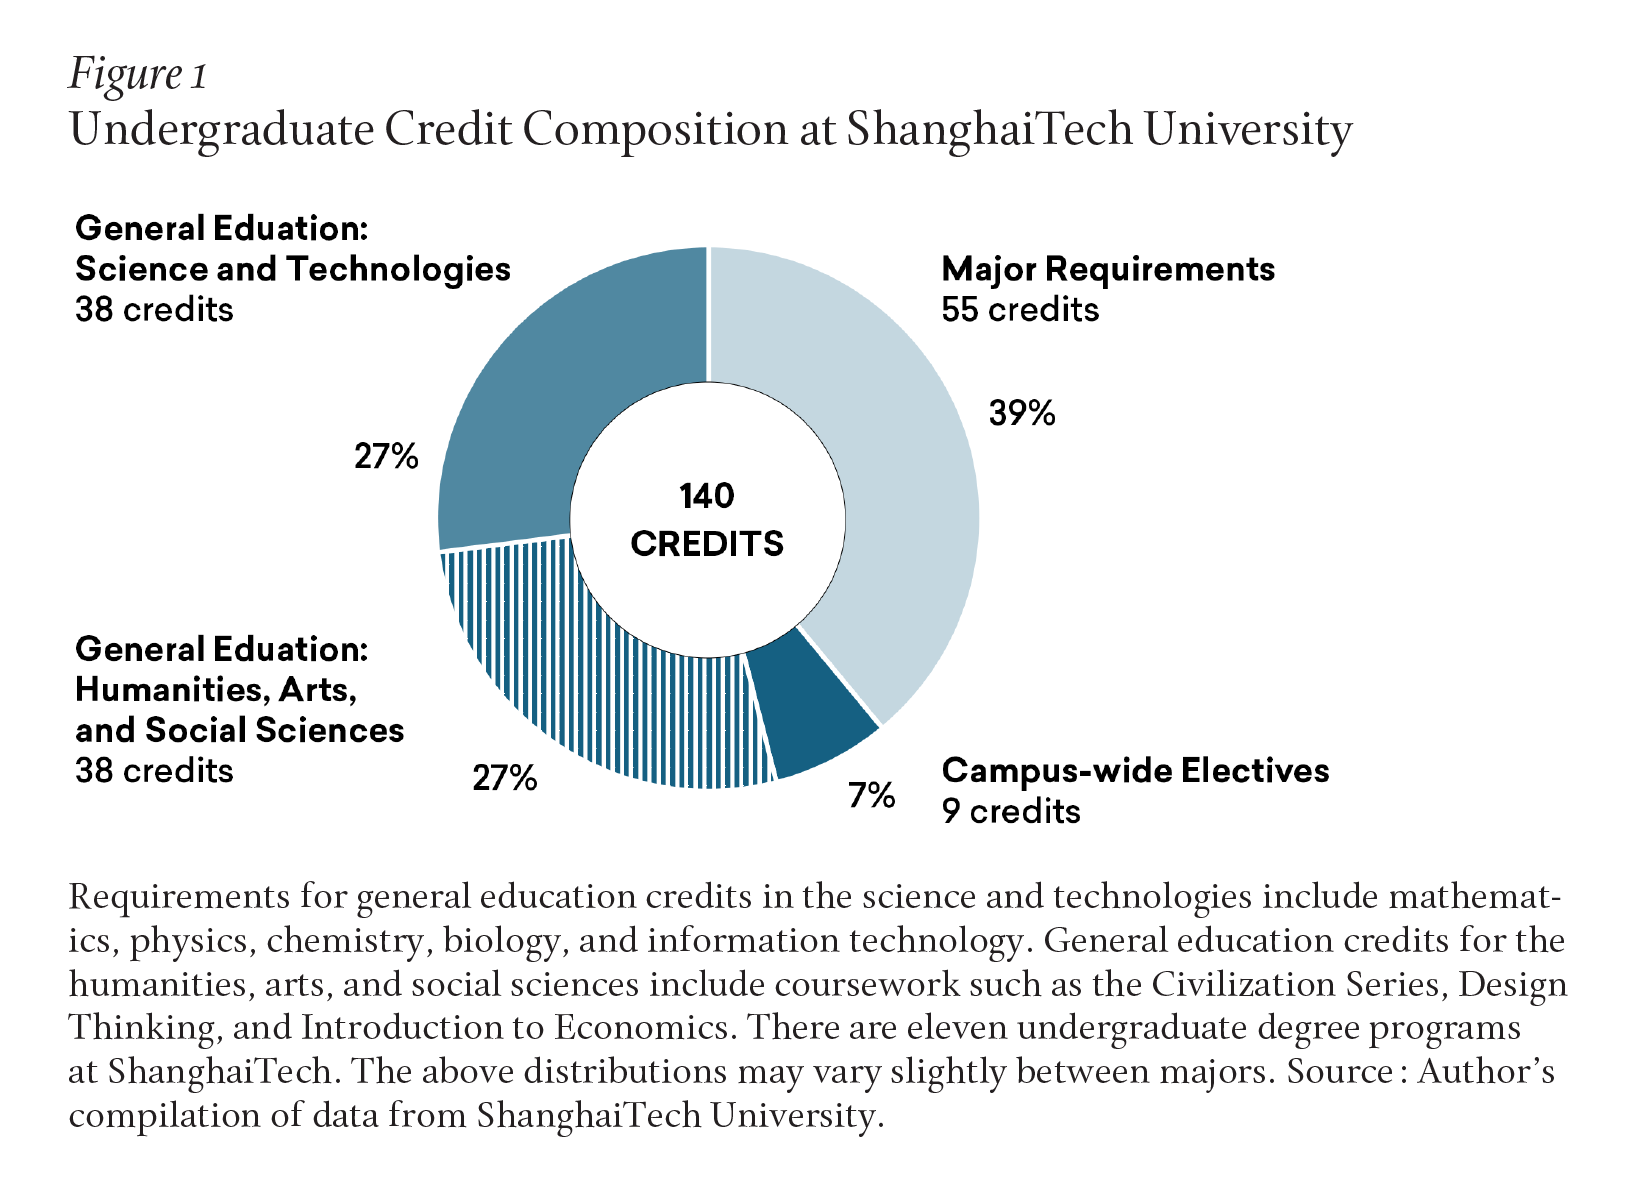 A circle graph shows the current distribution of undergraduate credit hours across major requirements (39%), general education for science and technologies (27%), general education for the humanities, arts, and social sciences (27%), and campus-wide electives (9%).